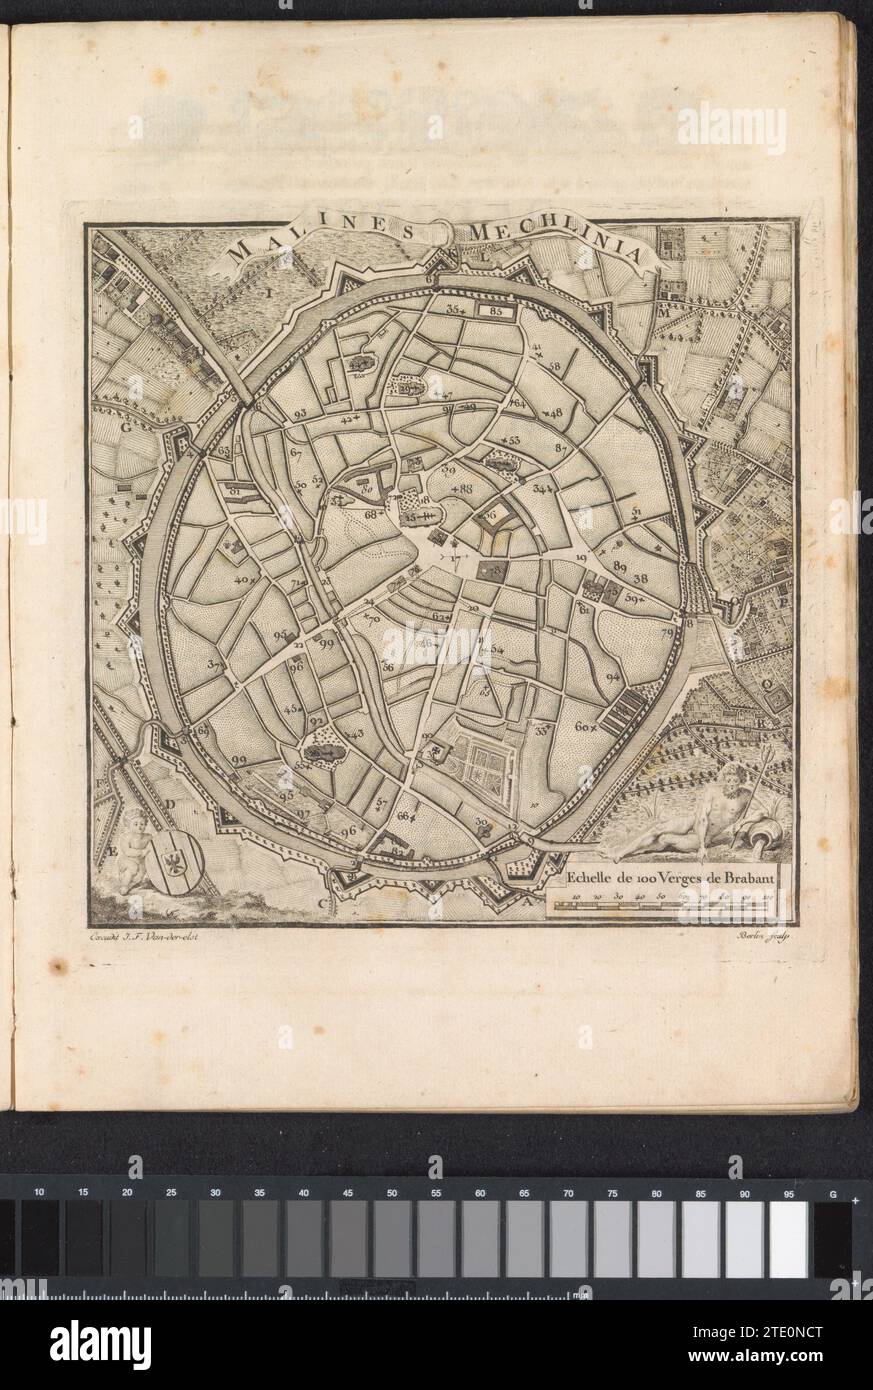 Map of Mechelen, 1775-1825, 1825 Map of the city of Mechelen, which are indicated the most important buildings that were in 1775. On the opposite page is the title and the legend 1-79 and A-r. Illustration in a publication on the occasion of the 1050-year-old celebration in 1825 of the death of Saint Rumoldus or Rombout, patron saint of the city of Mechelen, who was thought that he had died in 775. Mechelen paper etching / engraving  Mechelen Map of the city of Mechelen, which are indicated the most important buildings that were in 1775. On the opposite page is the title and the legend 1-79 an Stock Photo